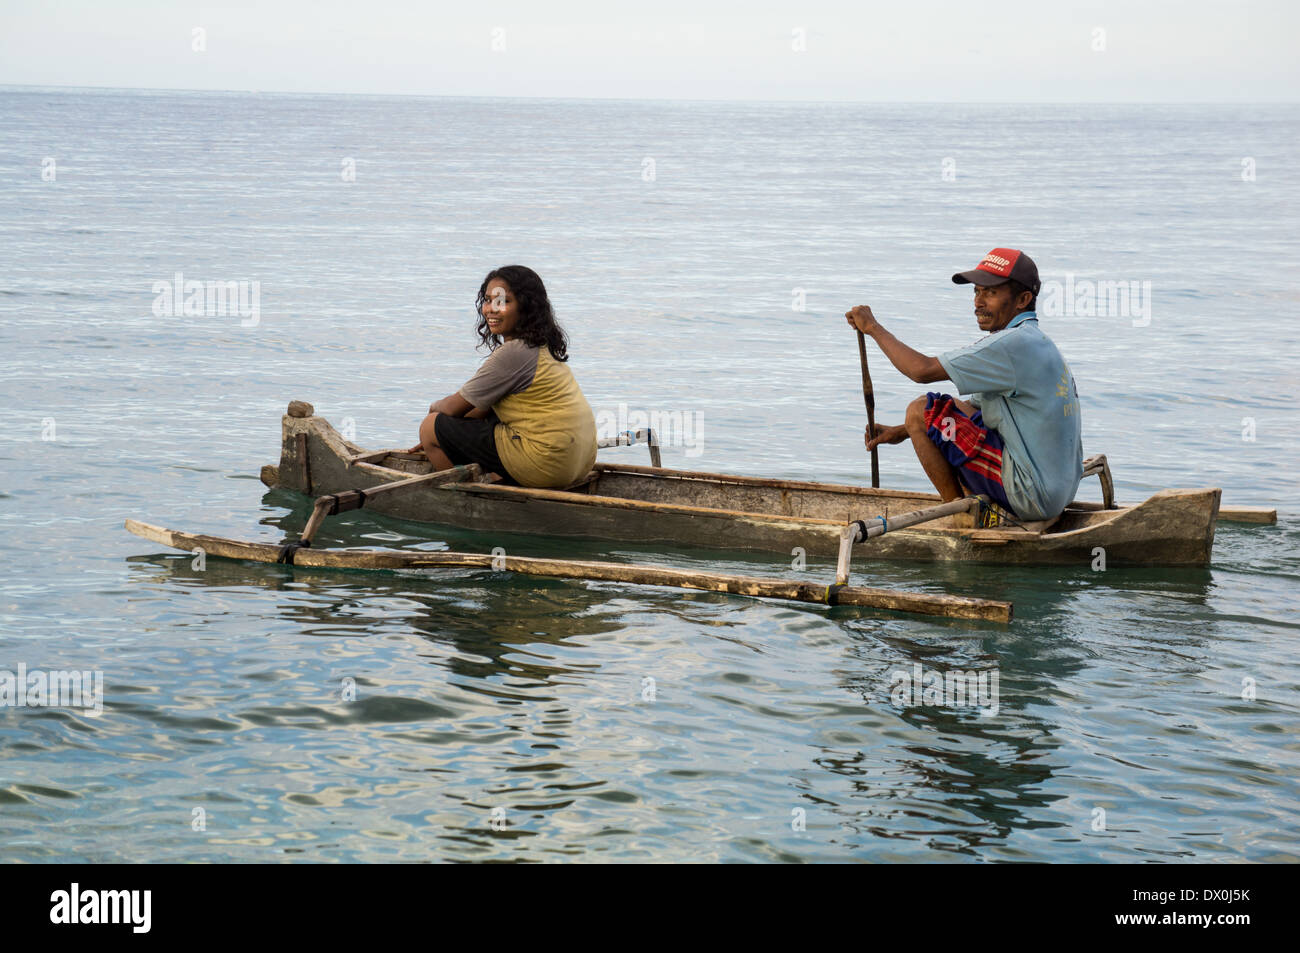 local people on a small boat, Indonesia Stock Photo